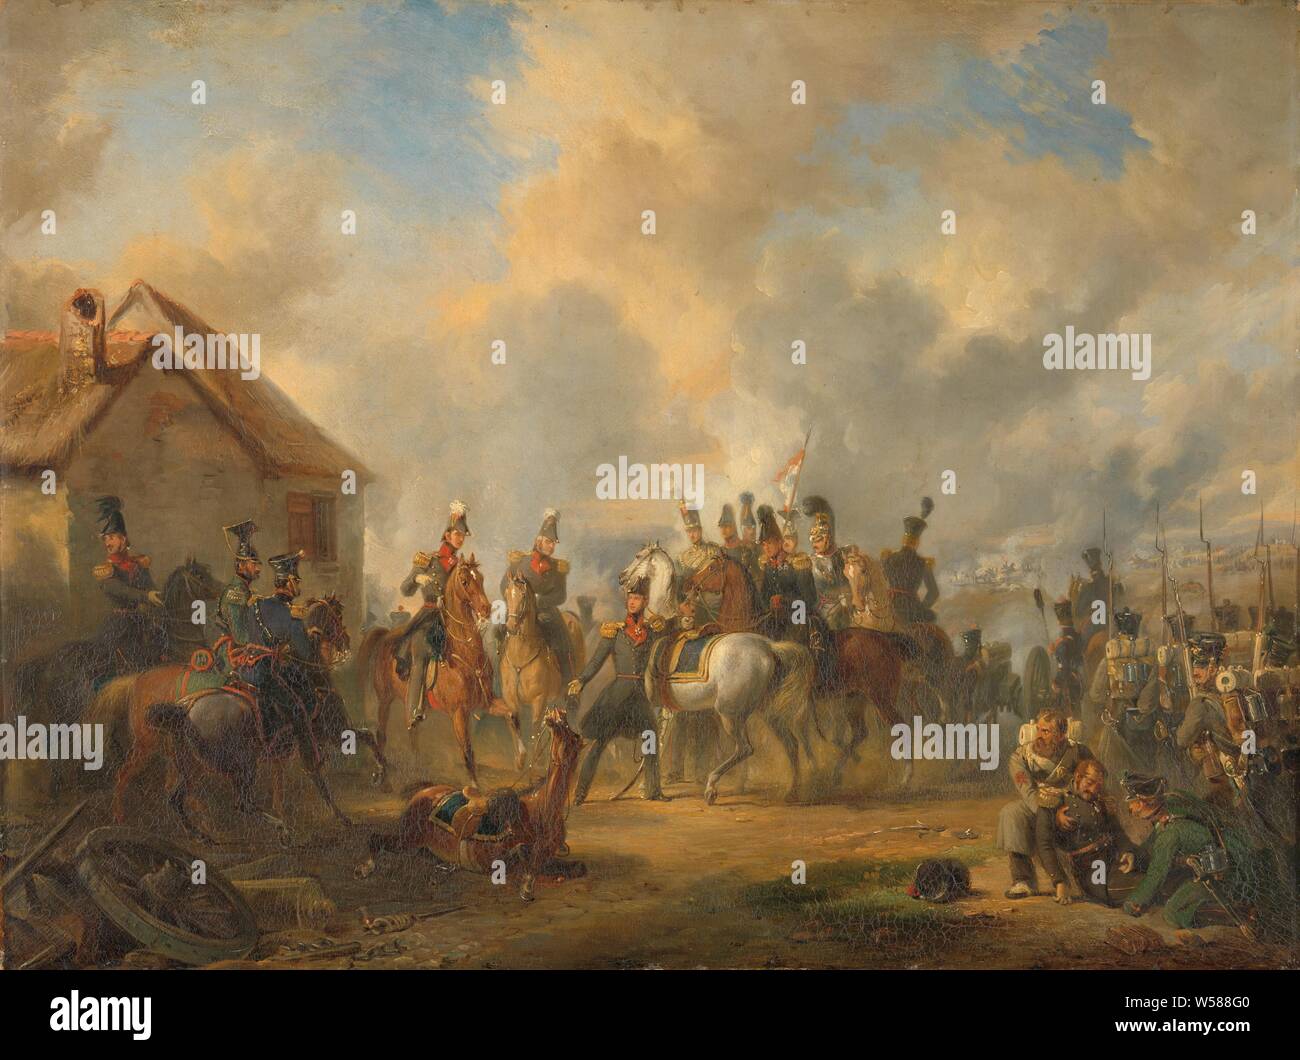 The Battle of Bautersem during the Ten Days' Campaign The Engagement at Bautersem, The Battle of Bautersem, 12 August 1831, during the Ten-Day Campaign. The staff of the Prince of Orange consisting of mounted officers gathered in front of a farmhouse. In the center, the prince is standing next to his horse that was wounded, next to the prince Major Hoyel. On the right soldiers of the infantry and a wounded officer. The battlefield., Battle, prince, Boutersem, Willem II (king of the Netherlands), J.H. Hoyel, Nicolaas Pieneman (signed by artist), 1833, canvas, oil paint (paint), h 46 cm × w 60.5 Stock Photo